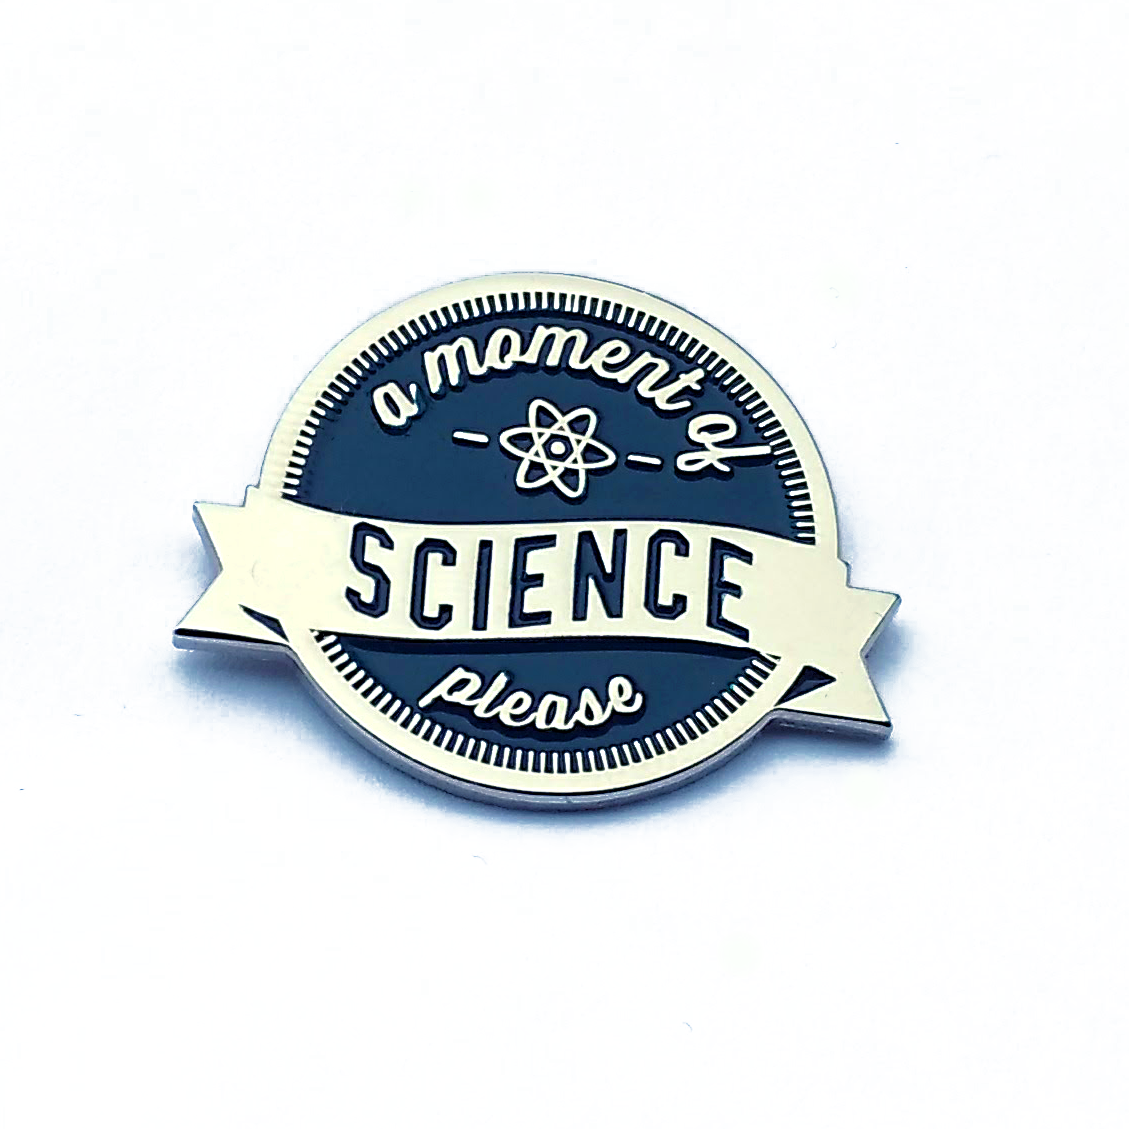 A Moment of Science Enamel Pin